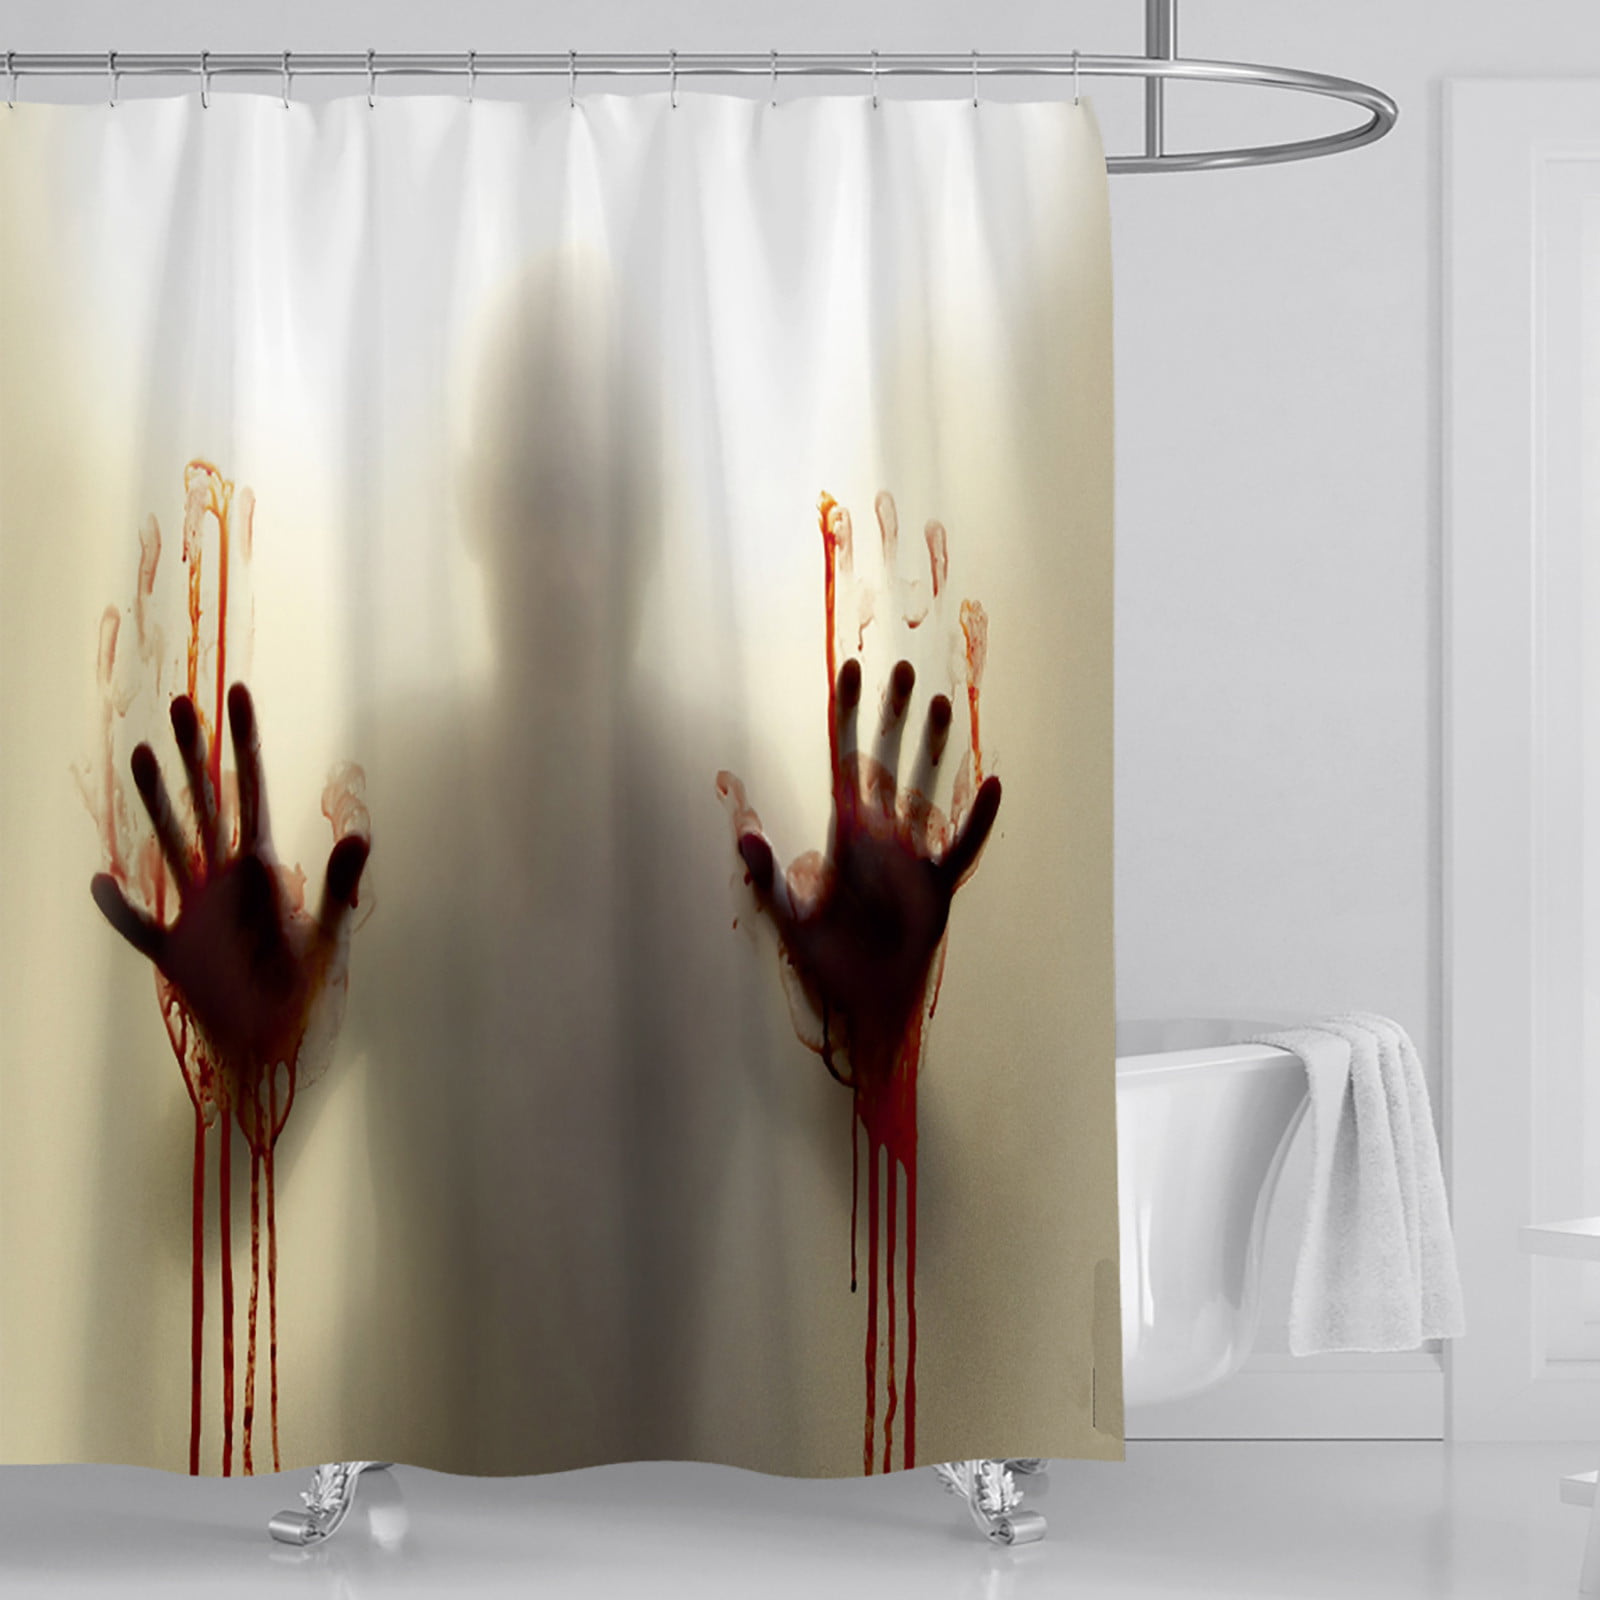 A Bloody Female Ghost 3D Shower Curtain Waterproof Fabric Bathroom Decoration 